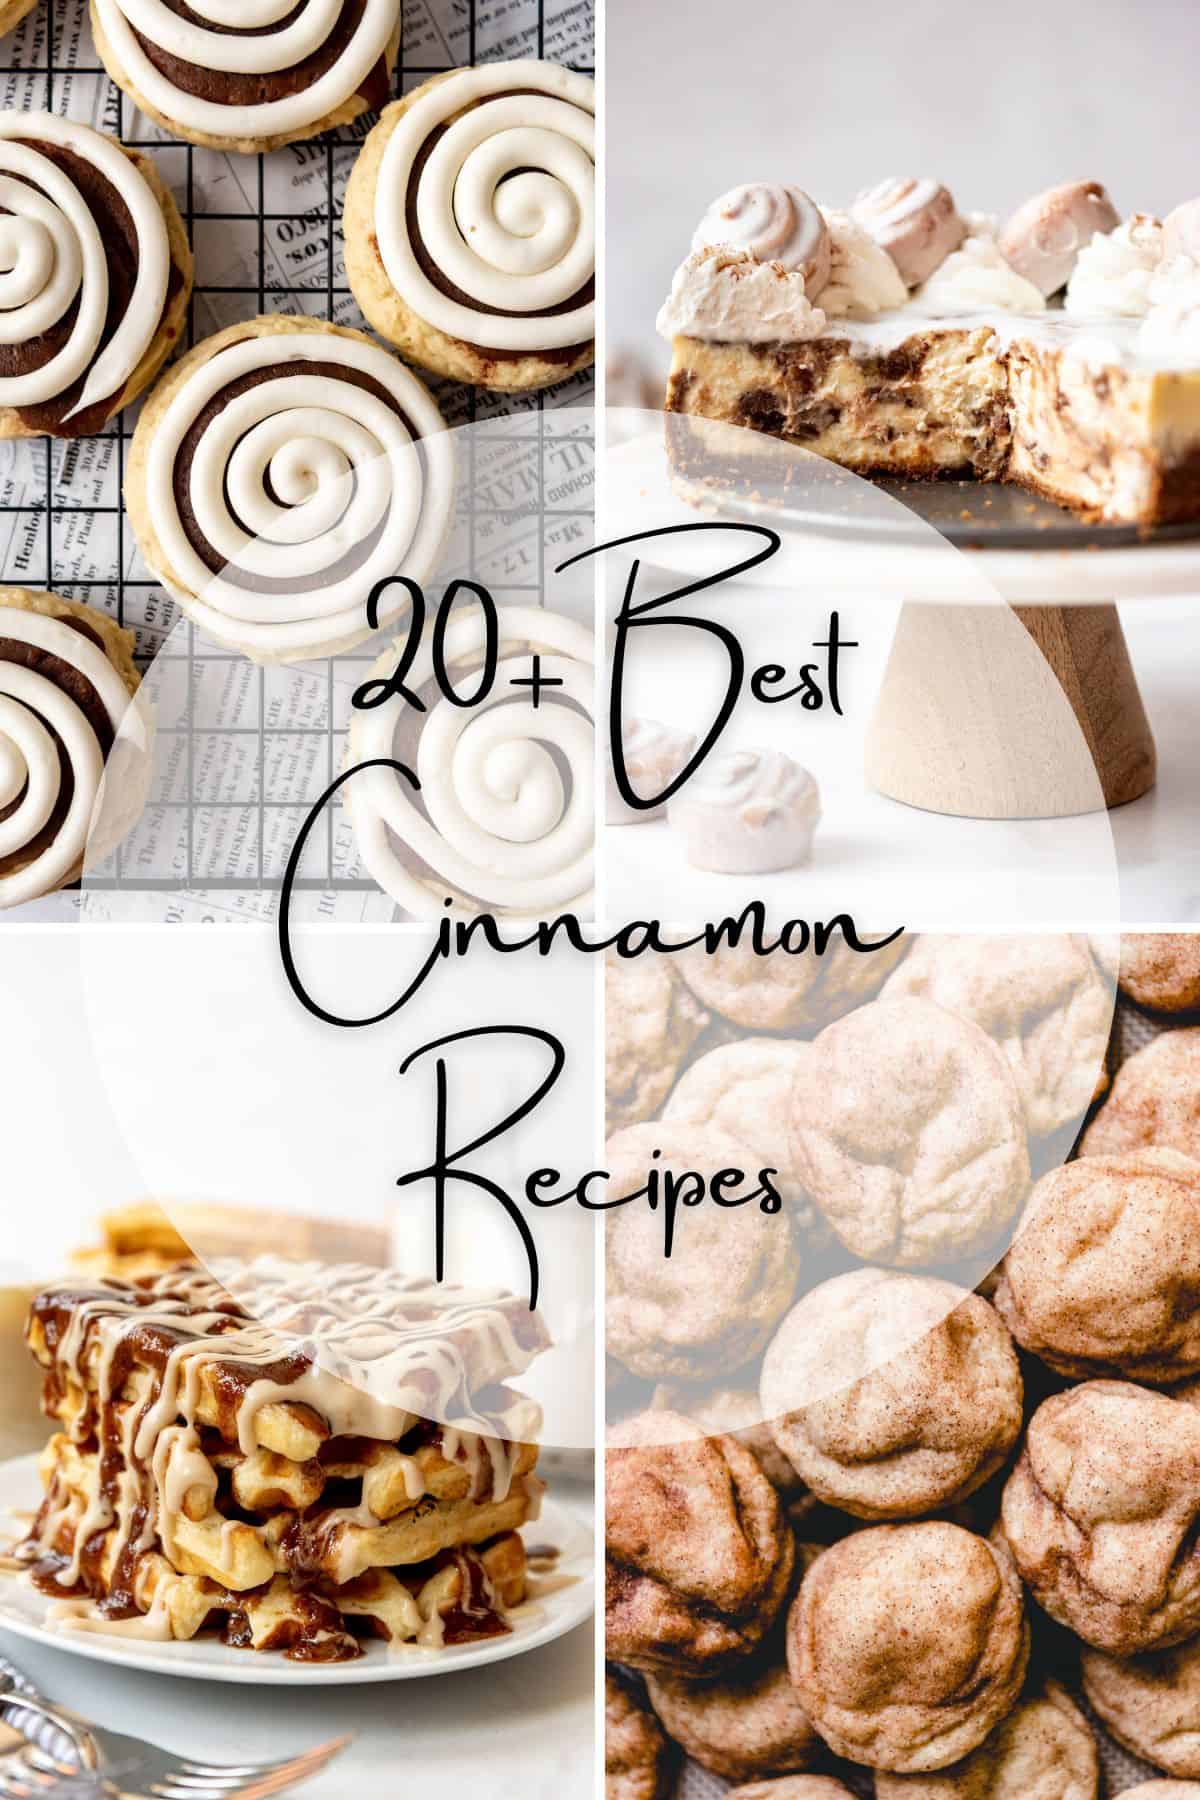 A collage of images of recipes with cinnamon.